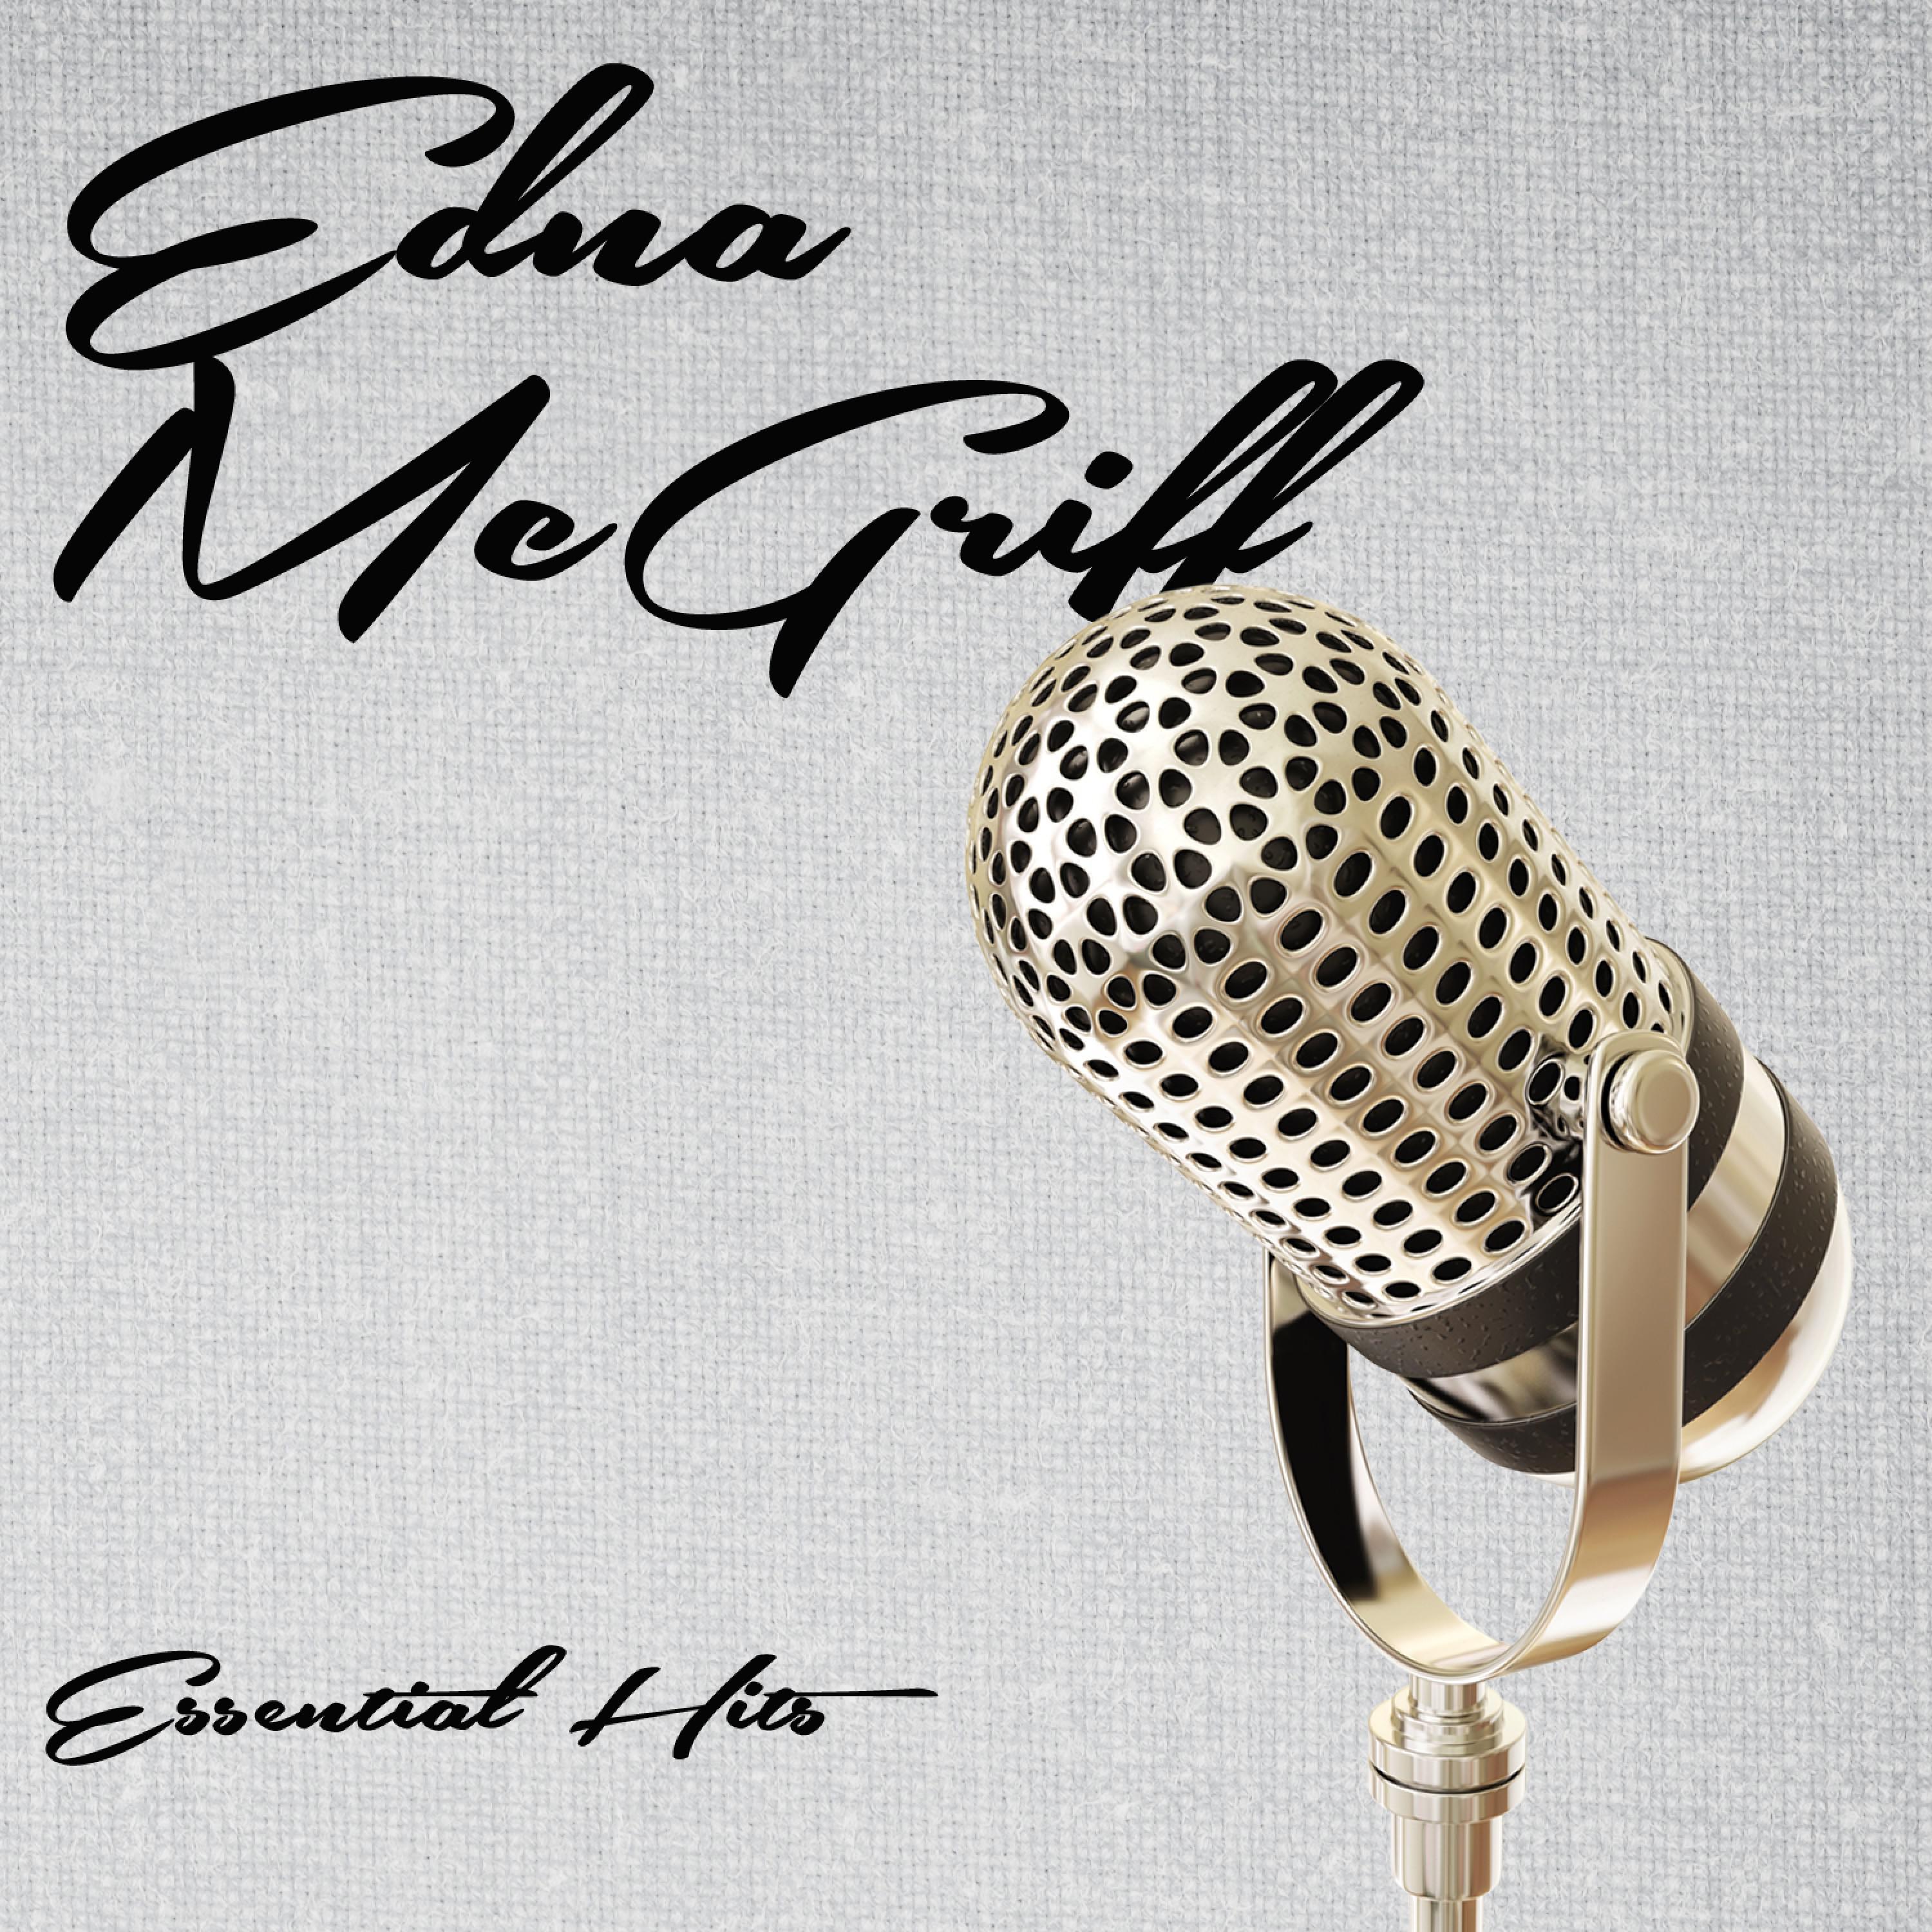 Edna McGriff - He's Got the Whole World in His Hands (Original Mix)